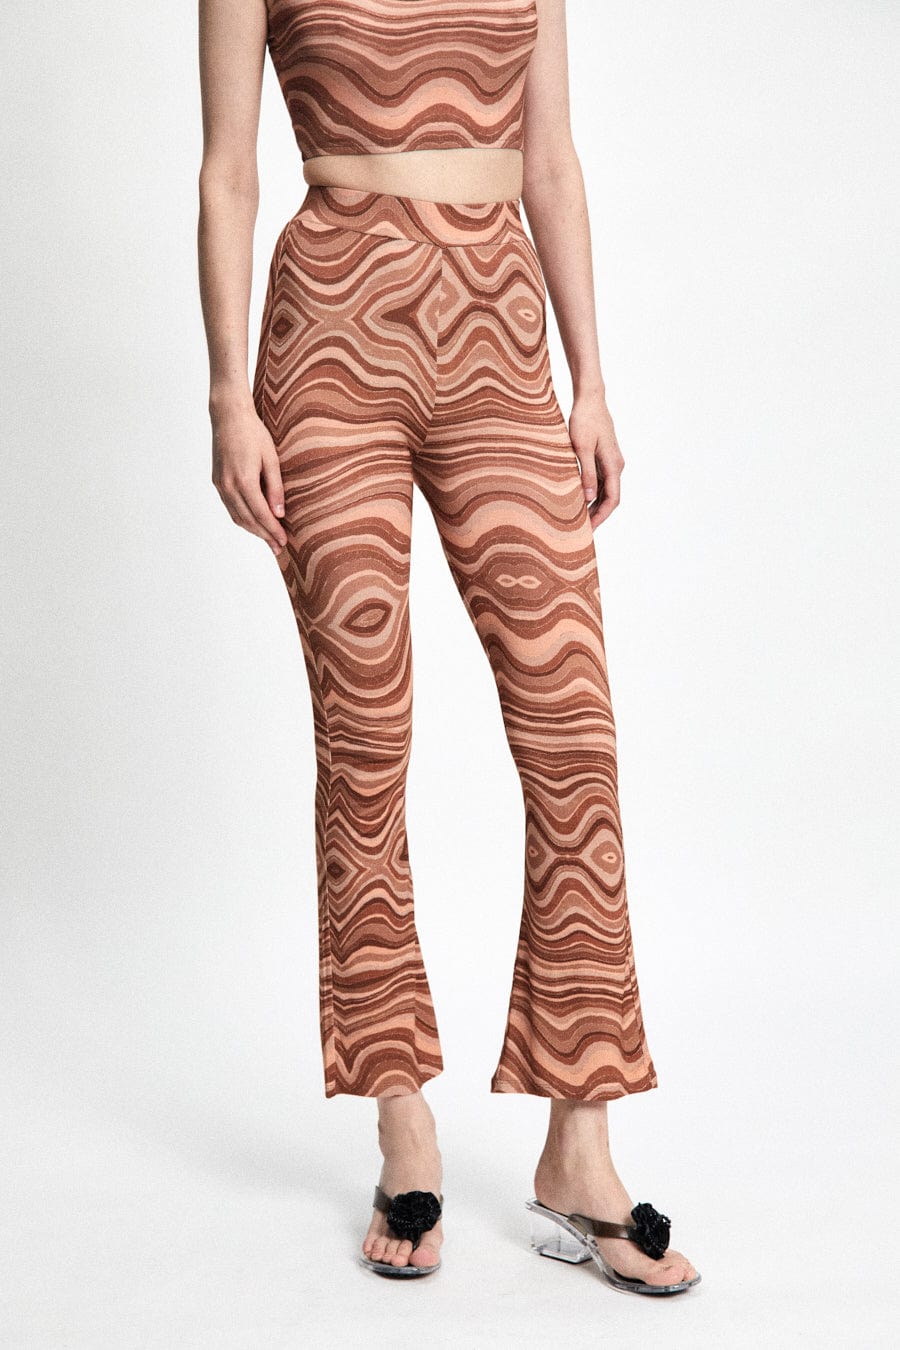 Grigg Trousers Brown Swirl